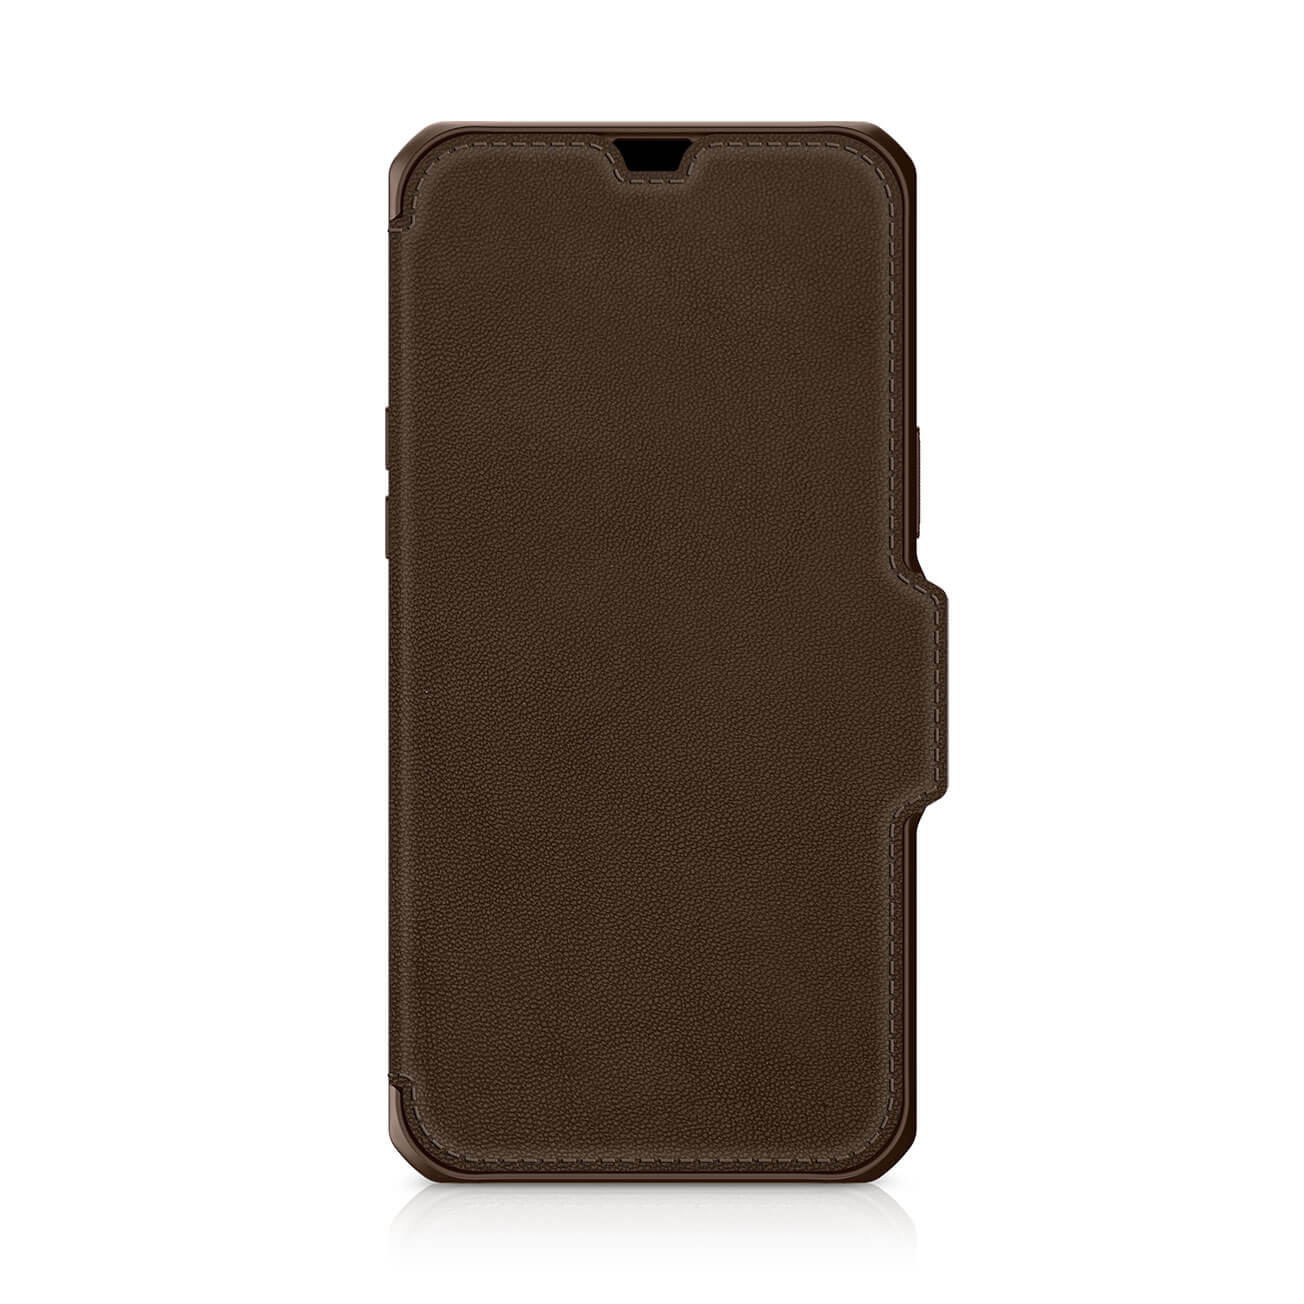 ITSKINS - Hybrid Folio Leather for iPhone 13 mini/12 mini [ Brown with real leather ]